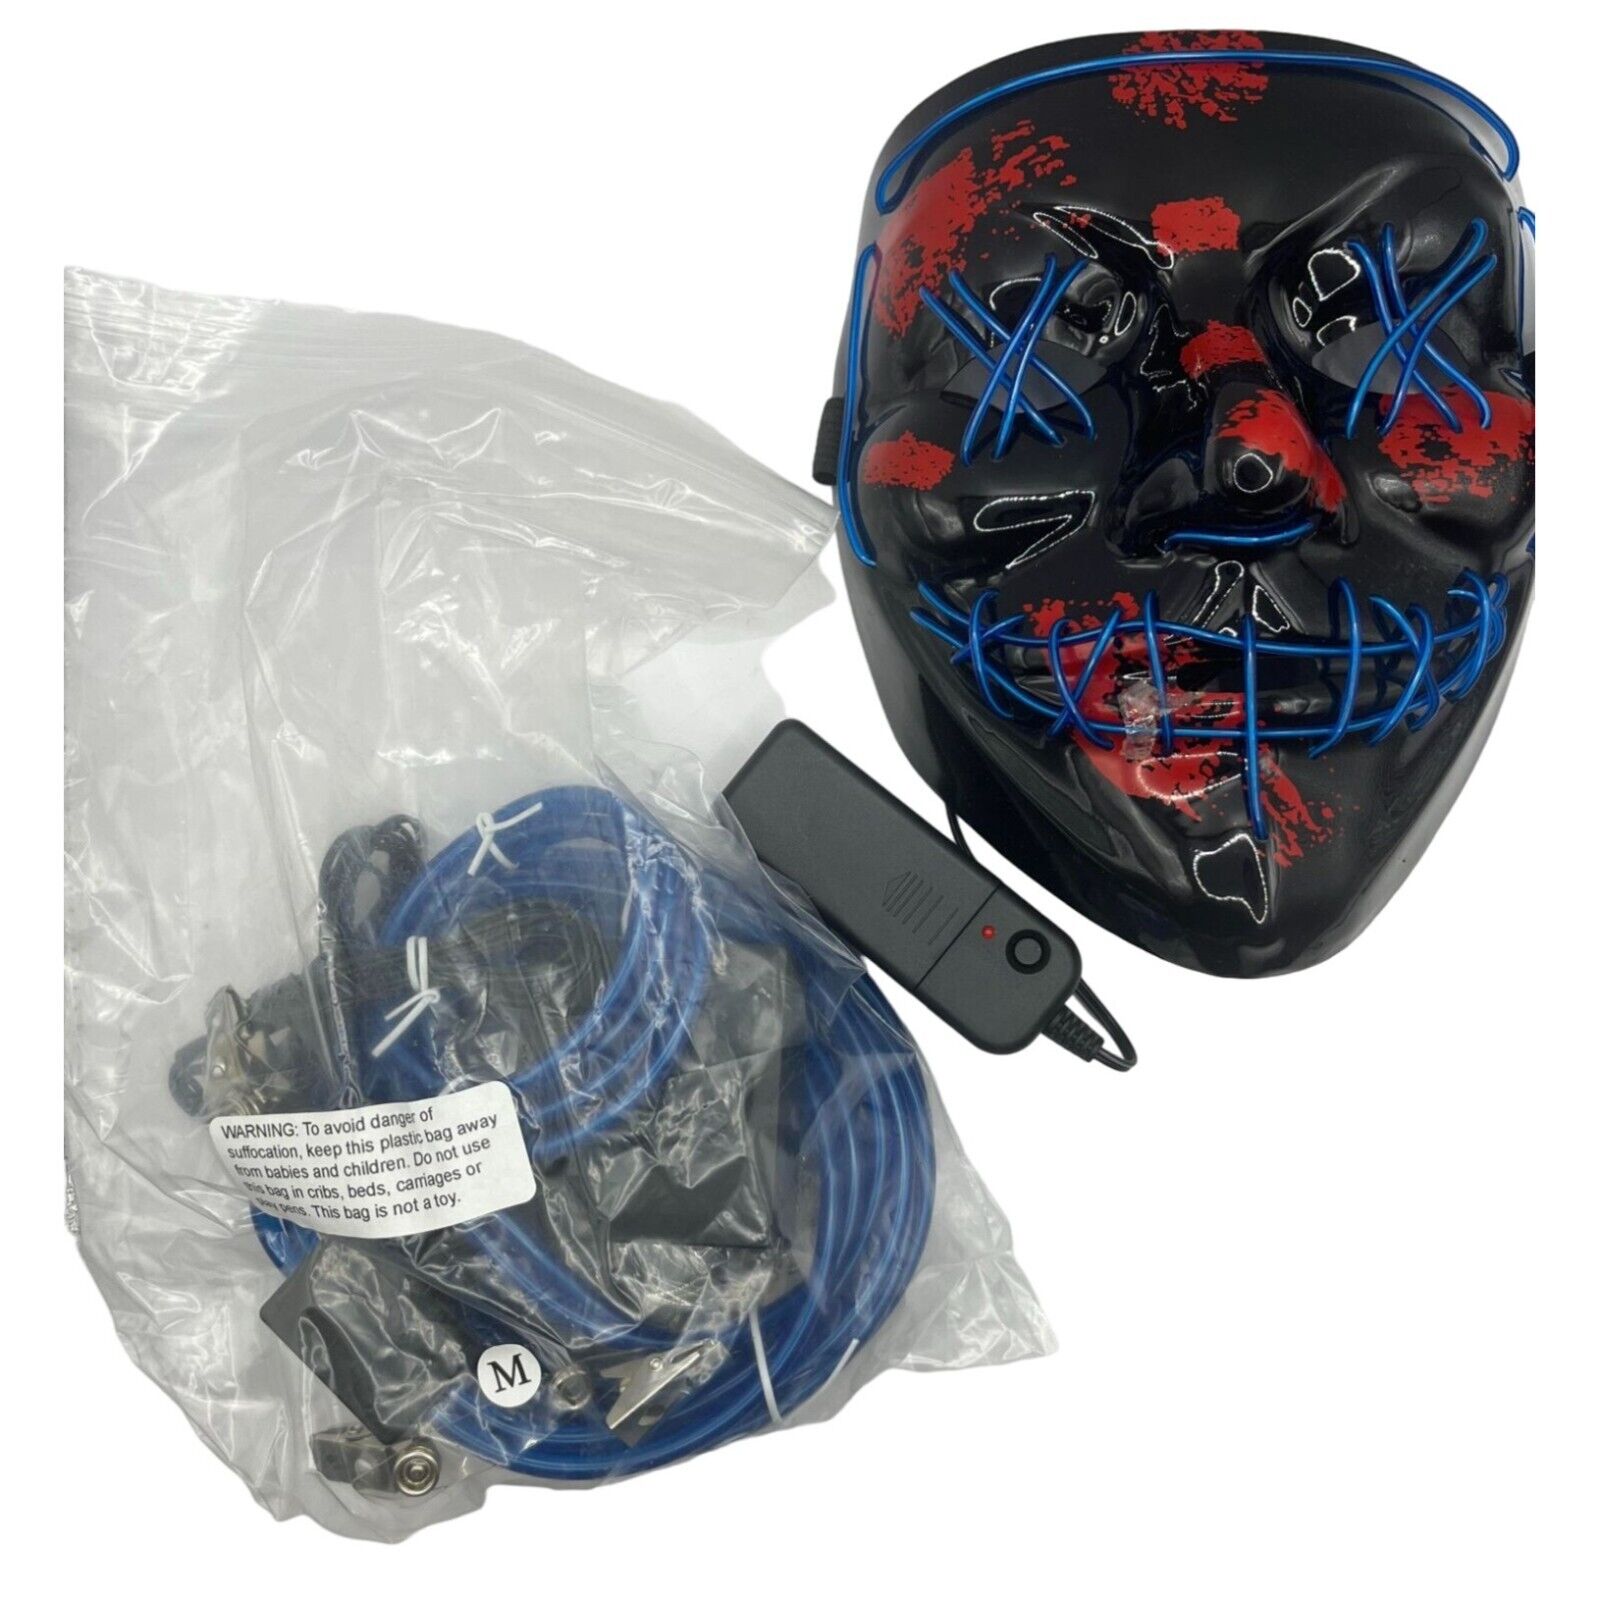 Light Up Halloween Mask Rave Purge And Stick Figure Tubing Blue/Red OS